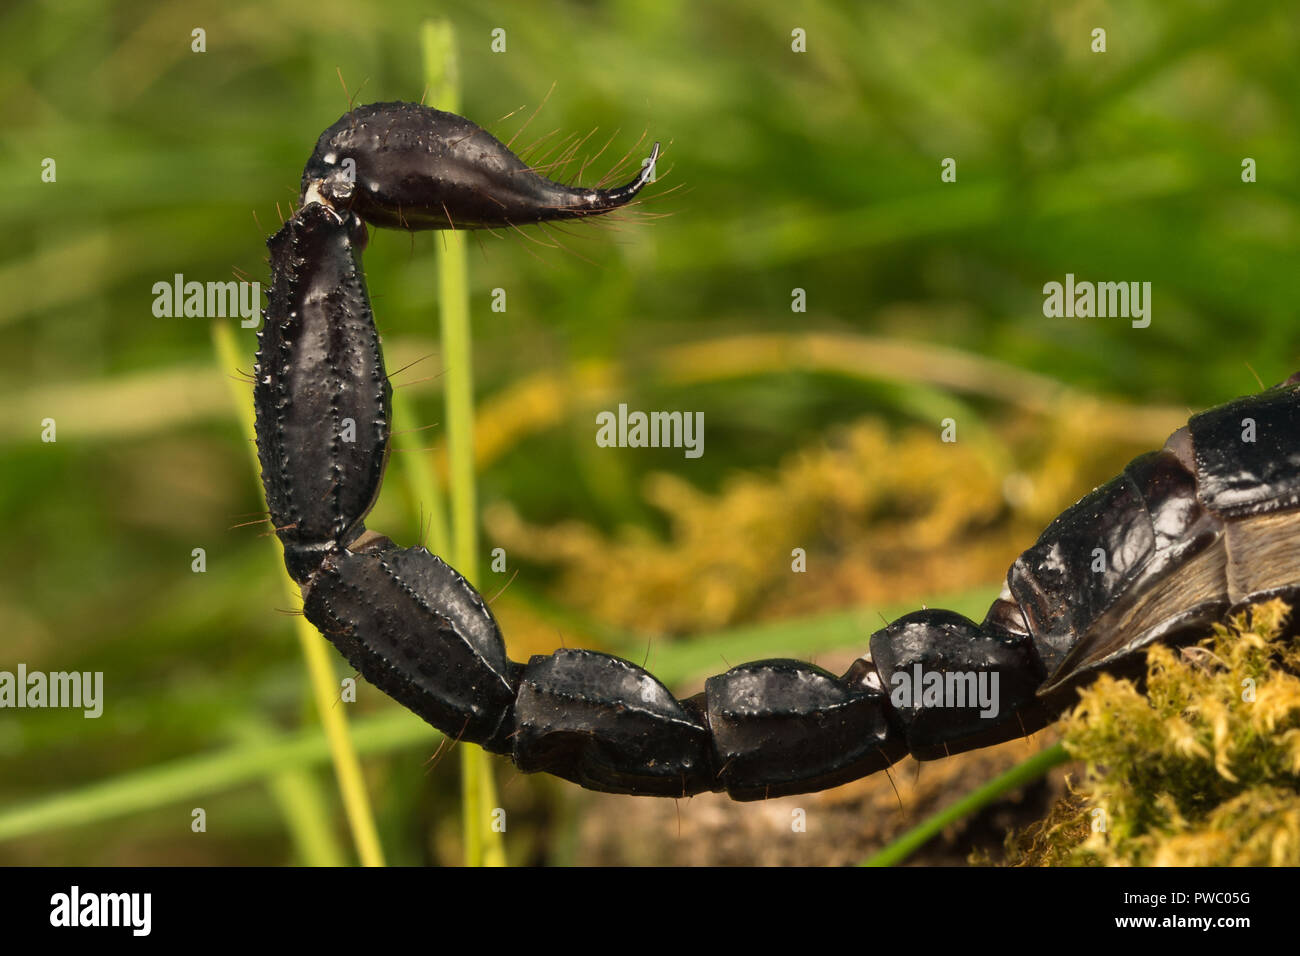 Emperor scorpion (Pandinus imperator), a species of scorpion native to West Africa - close-up of the curved tail with a venomous sting Stock Photo